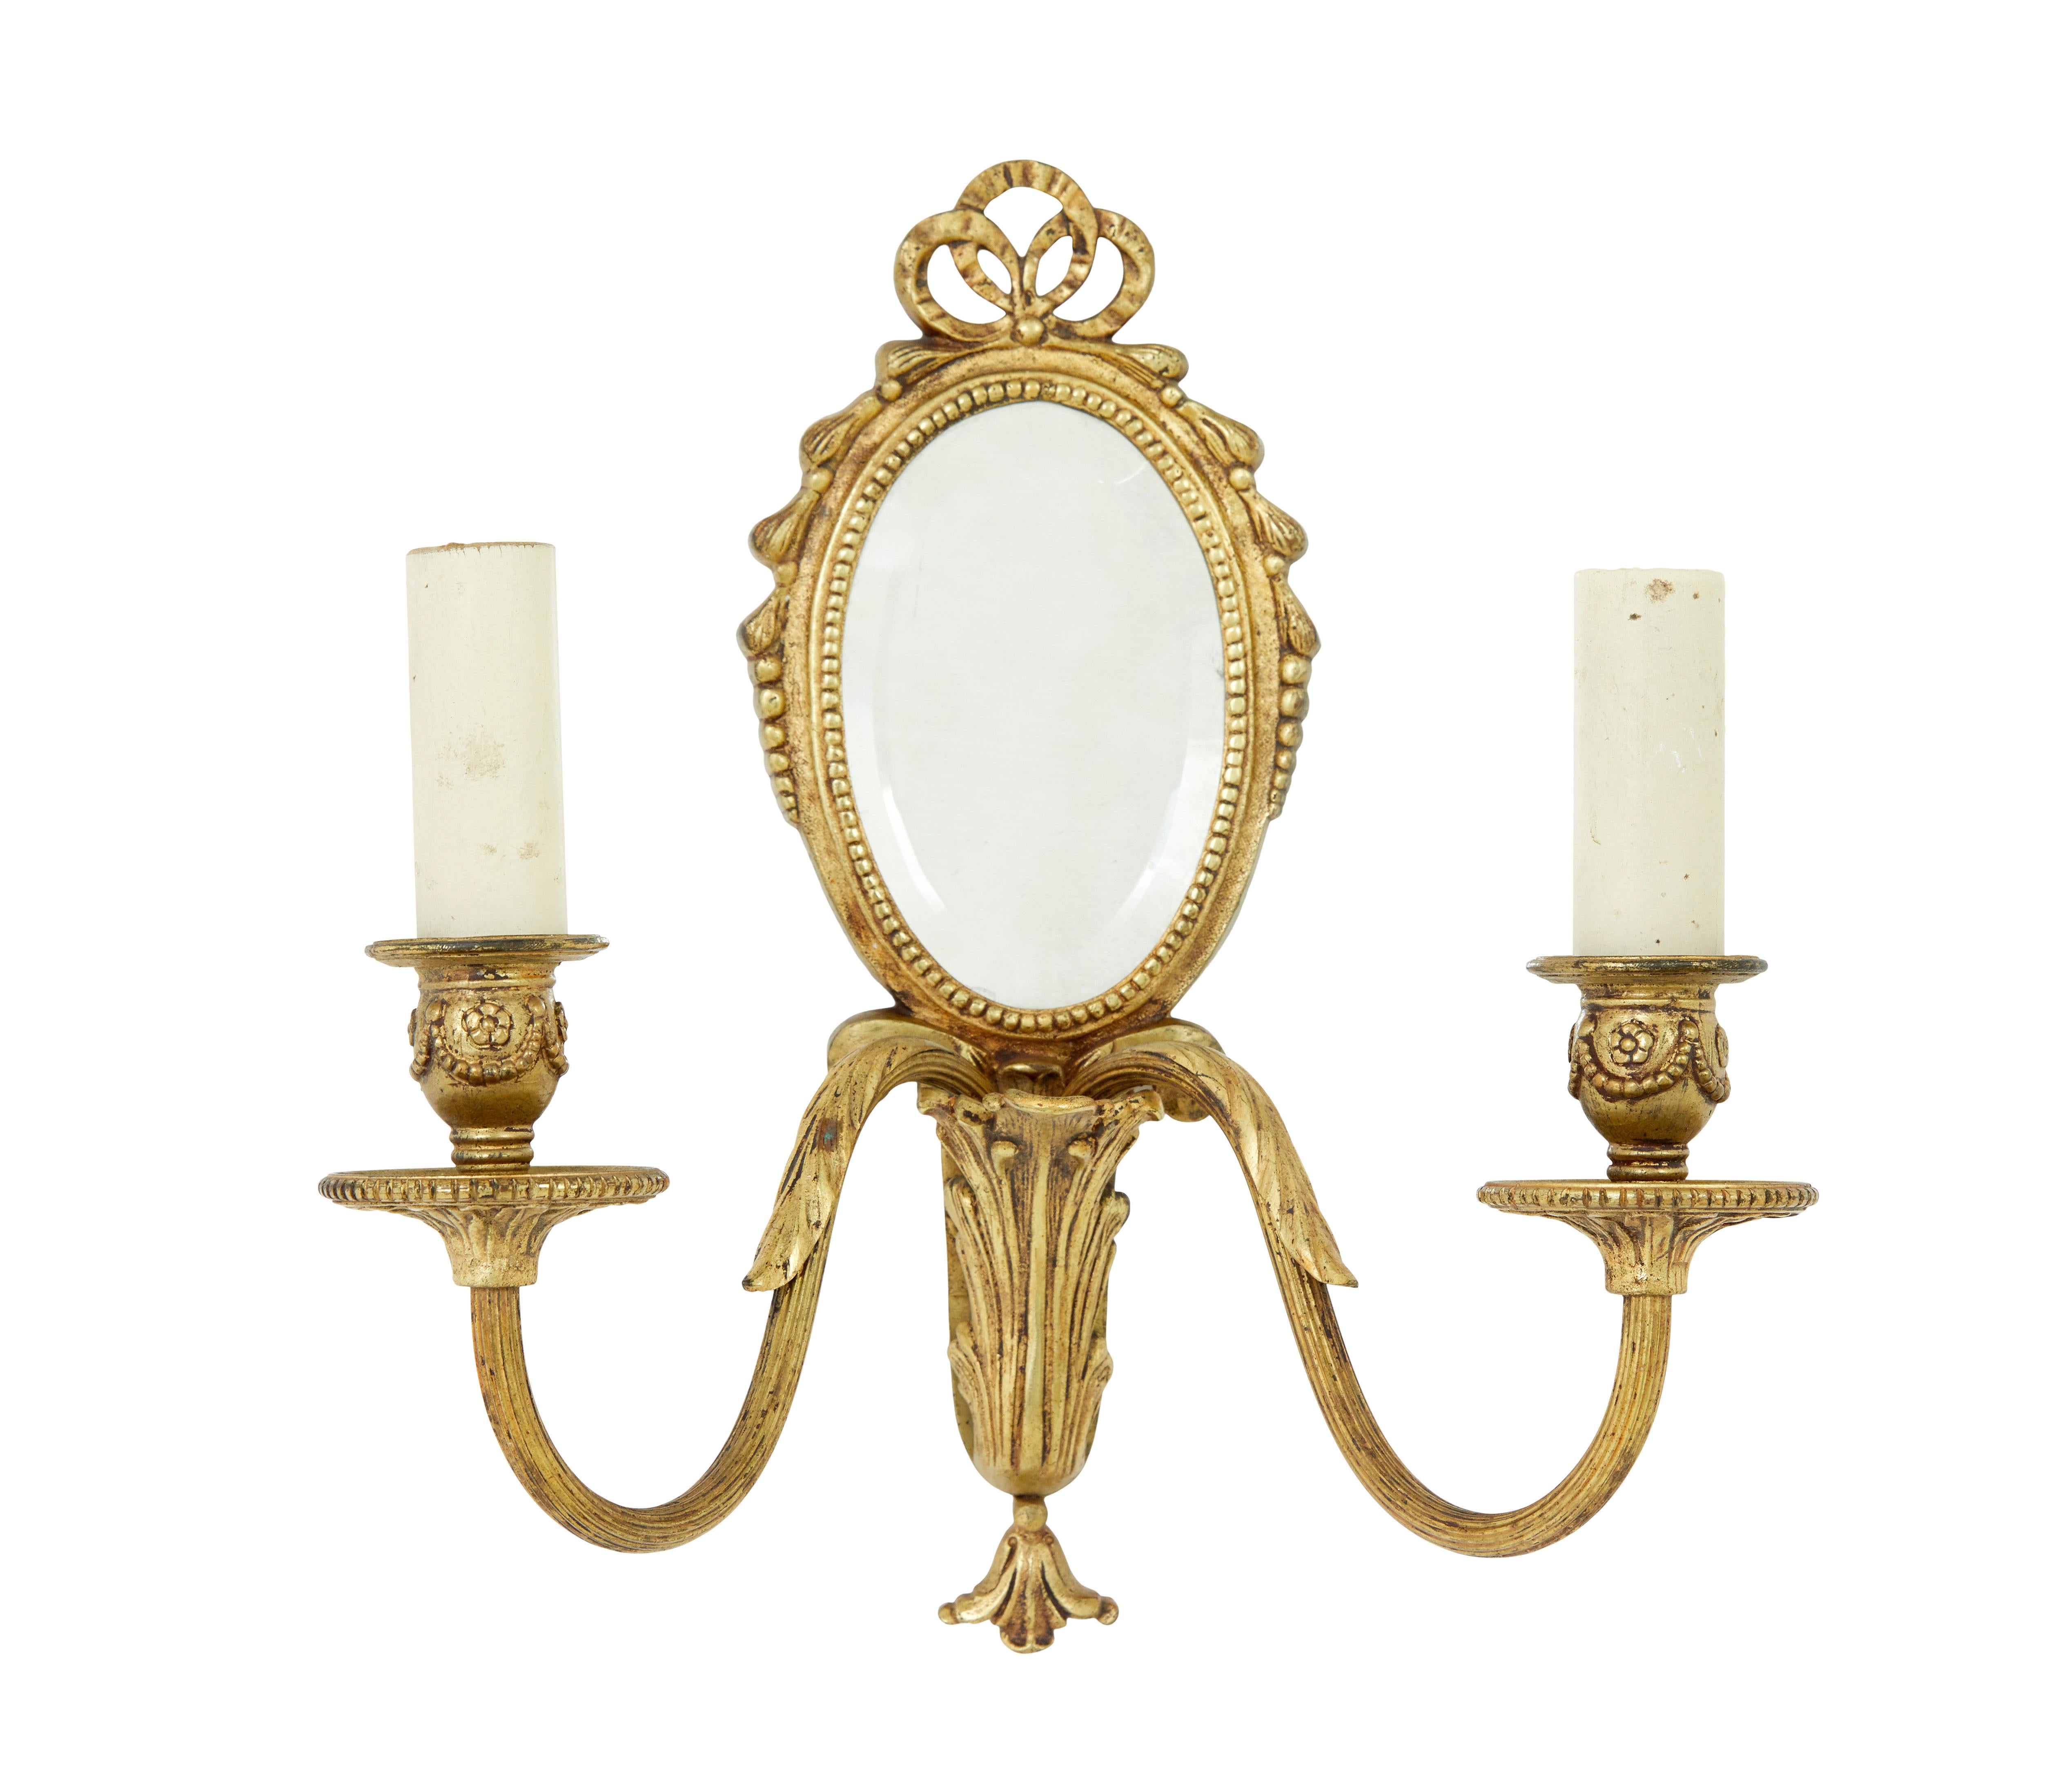 Pair of twin arm decorative wall lights circa 1960.

Oval mirror with bevelled edge, surrounded by beaded edging and swags.  Shaped arms with light fitting coming out of and urn. Original faux candle covers.

Some minor expected discolouration,